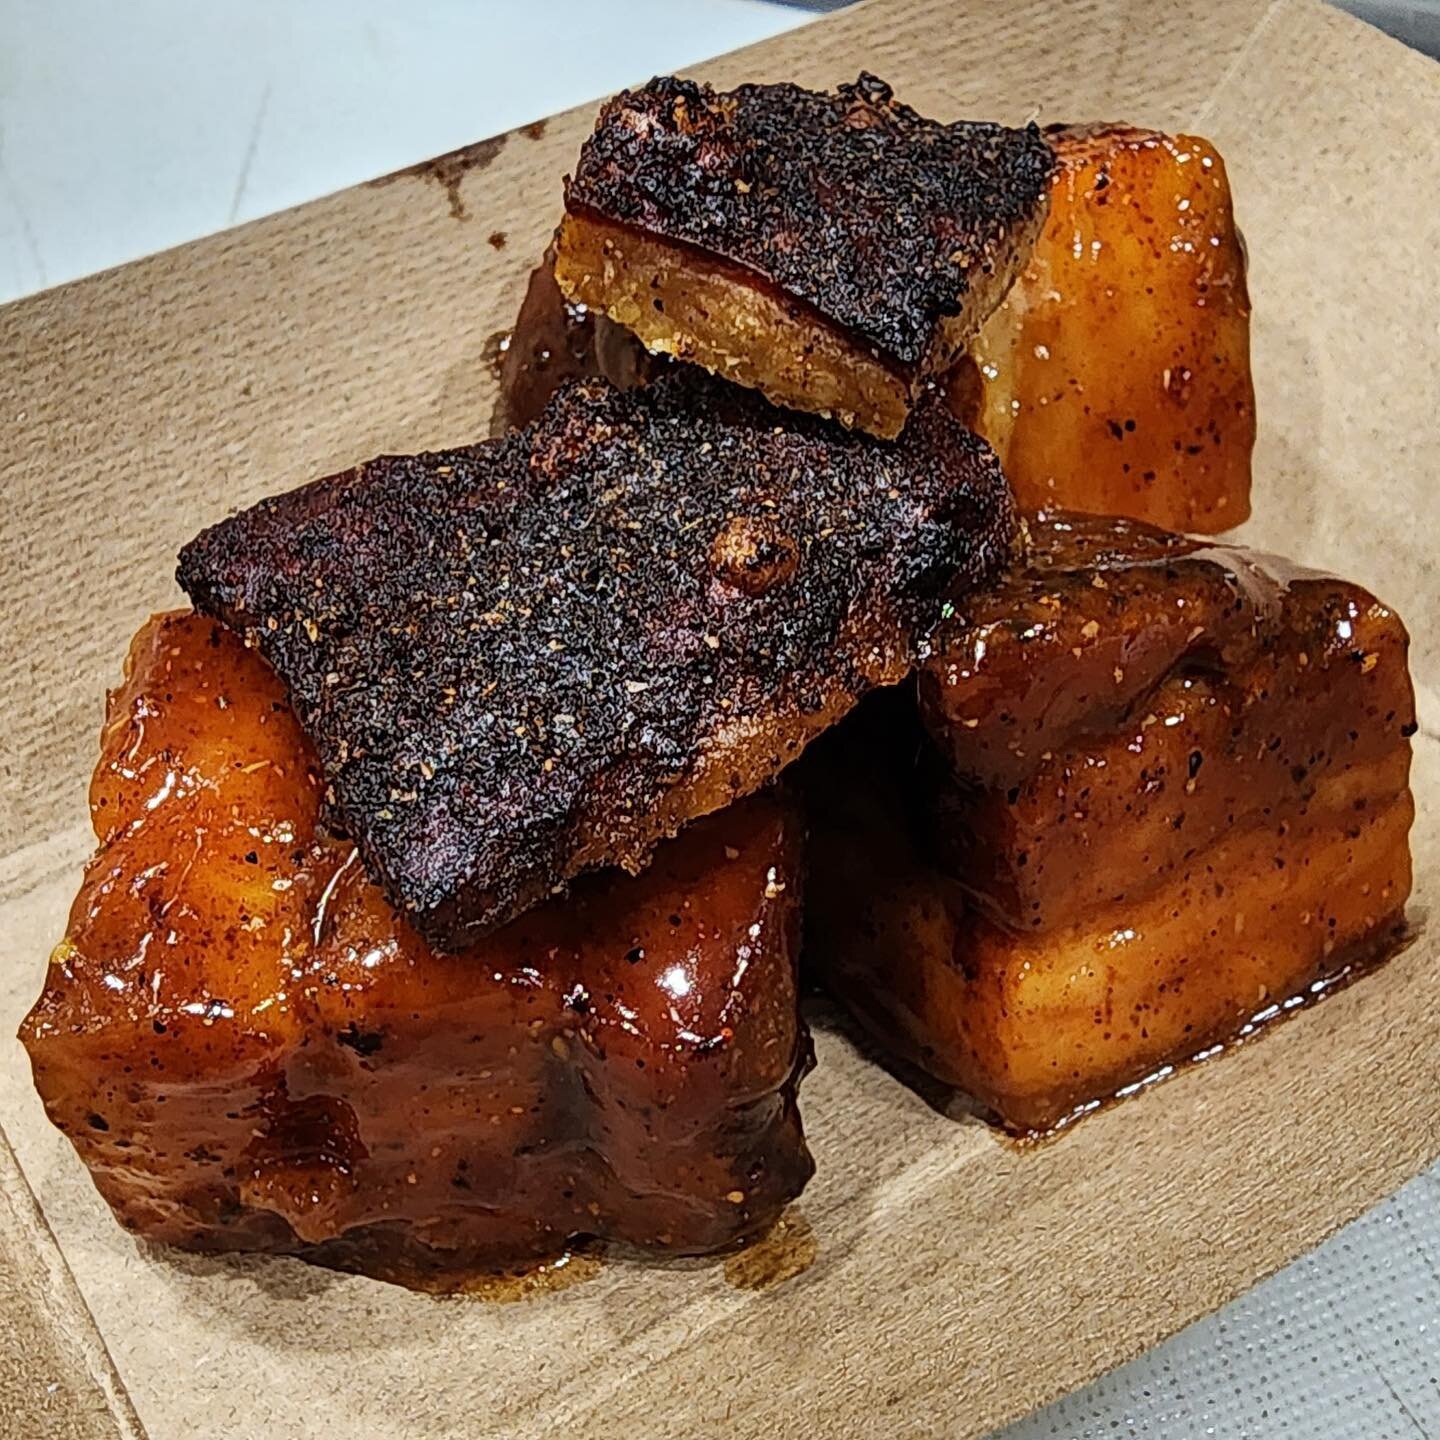 It&rsquo;s here people. Pork Belly Burnt Ends. Get it today for as long as they last, we&rsquo;ll be here from 12-5PM! #meatsmeatbbq #sofakinggood #lowandslow #barbecue #porkbelly #mattituck #northforker #nofo